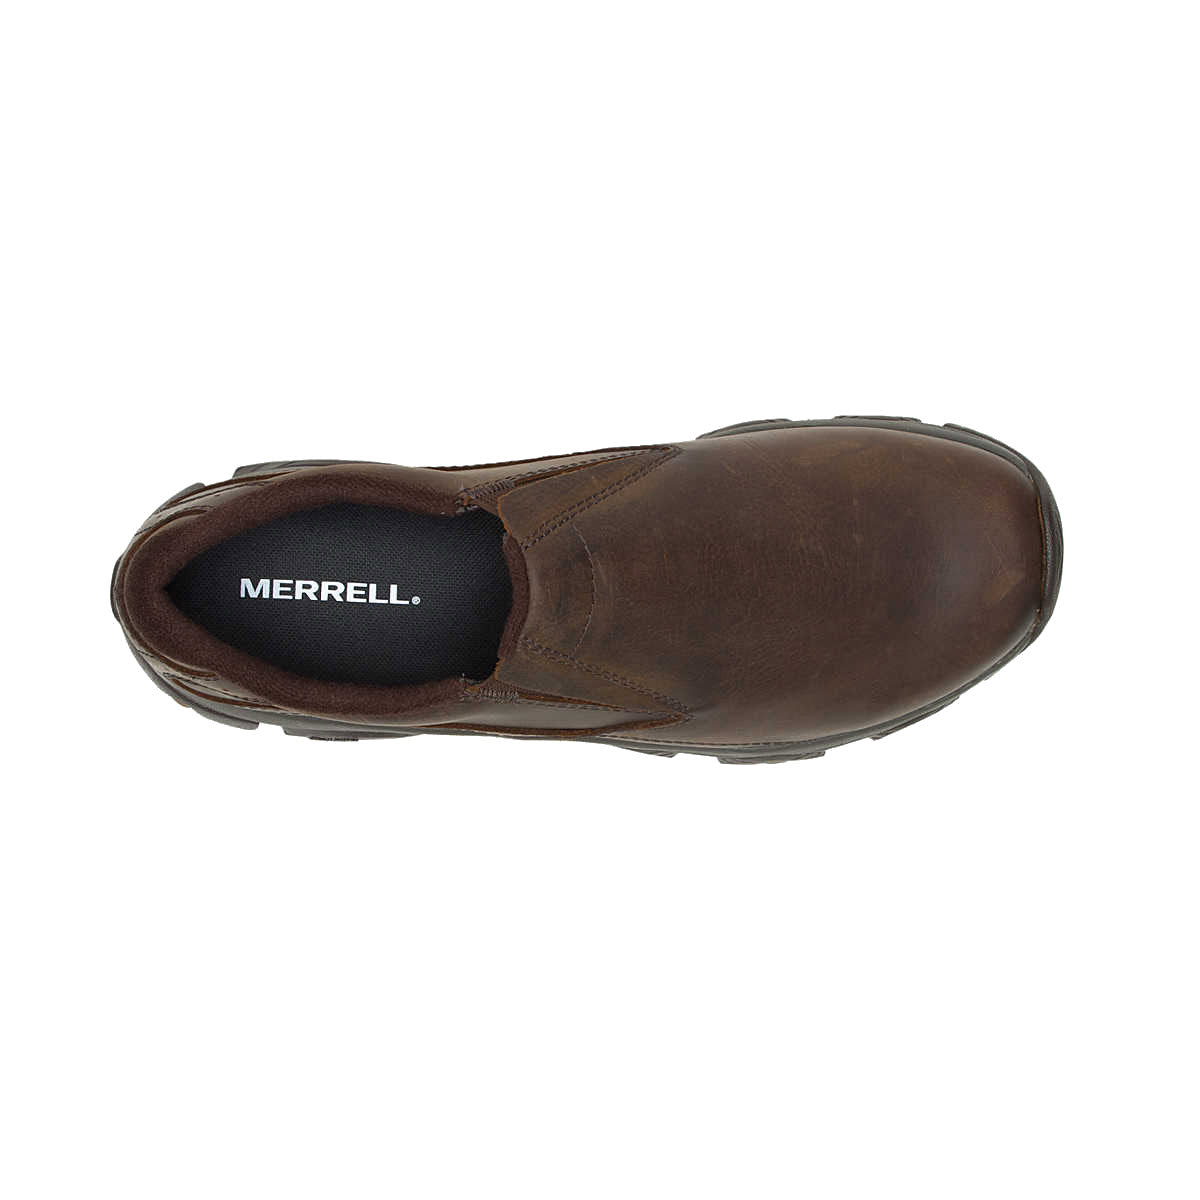 Top view of a single brown Merrell Moab Adventure 3 Moc Leather Earth shoe, showing the slip-on design and the brand name label inside.